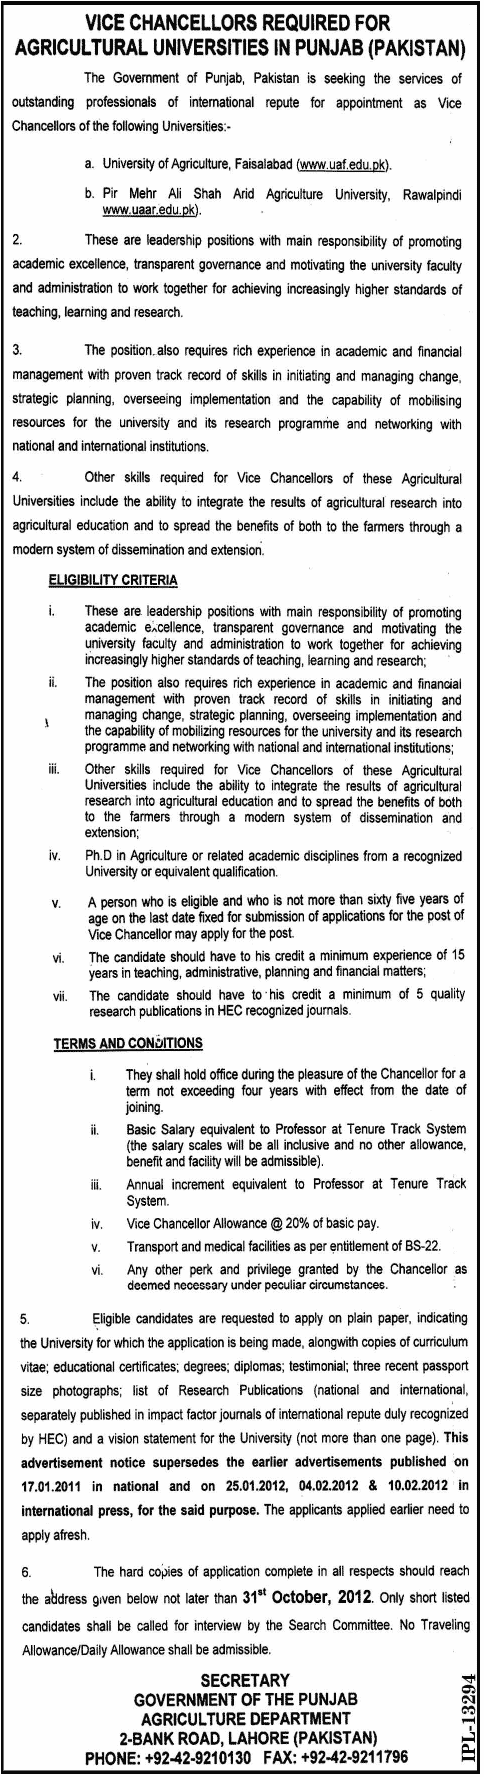 Vice Chancellors Required for Agricultural Universities in Punjab (Pakistan) (Government Job)